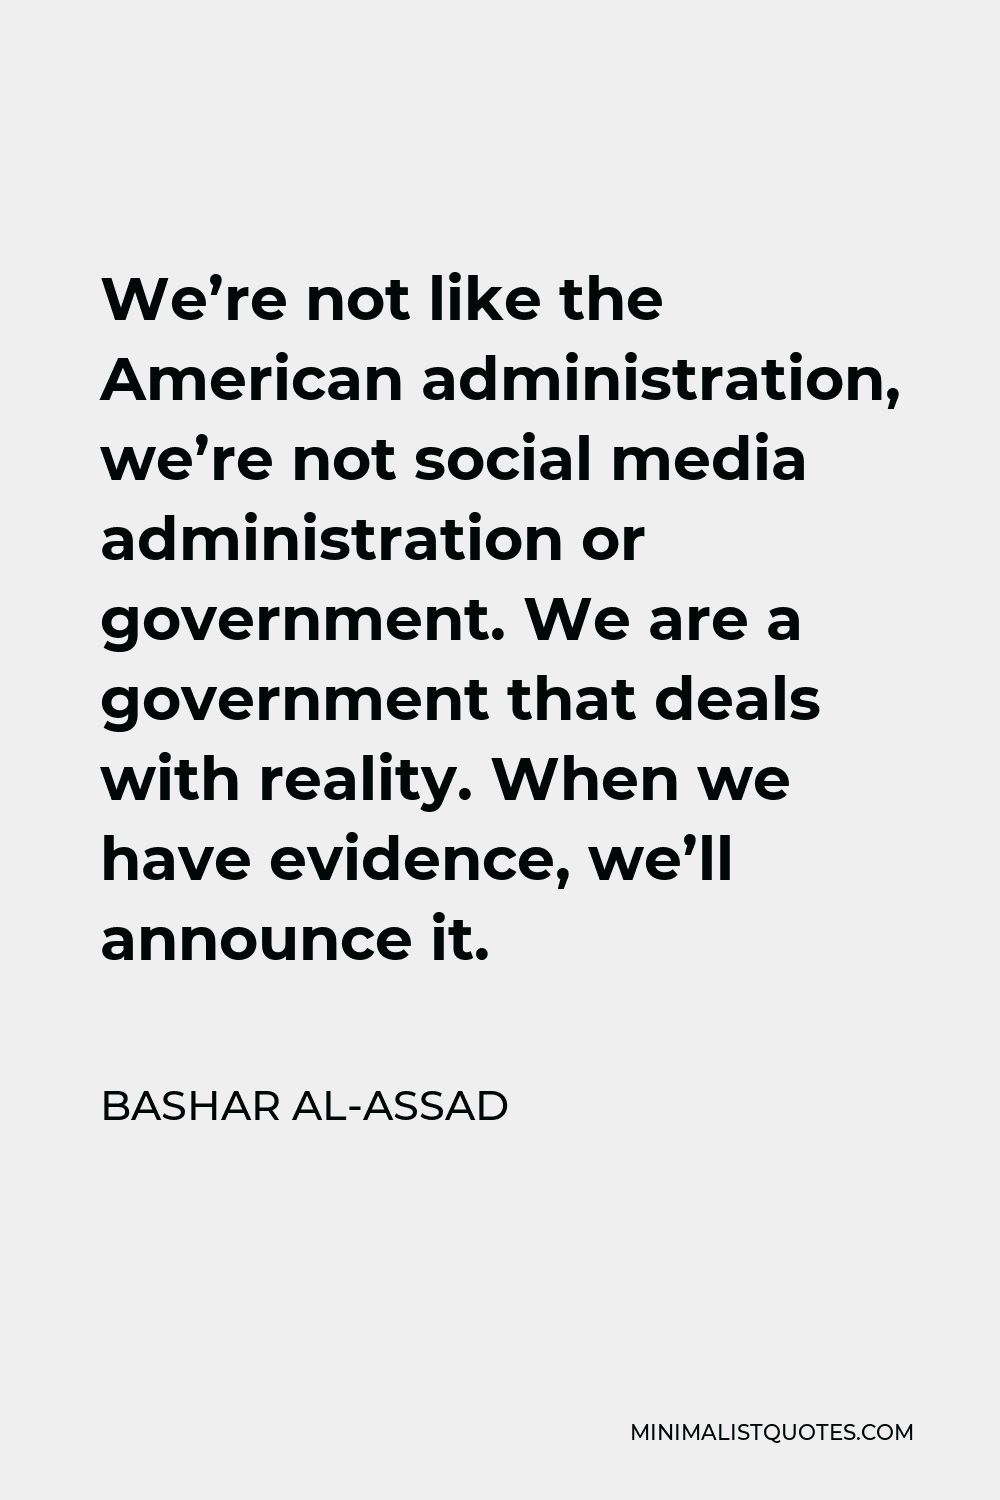 Bashar al-Assad Quote - We’re not like the American administration, we’re not social media administration or government. We are a government that deals with reality. When we have evidence, we’ll announce it.